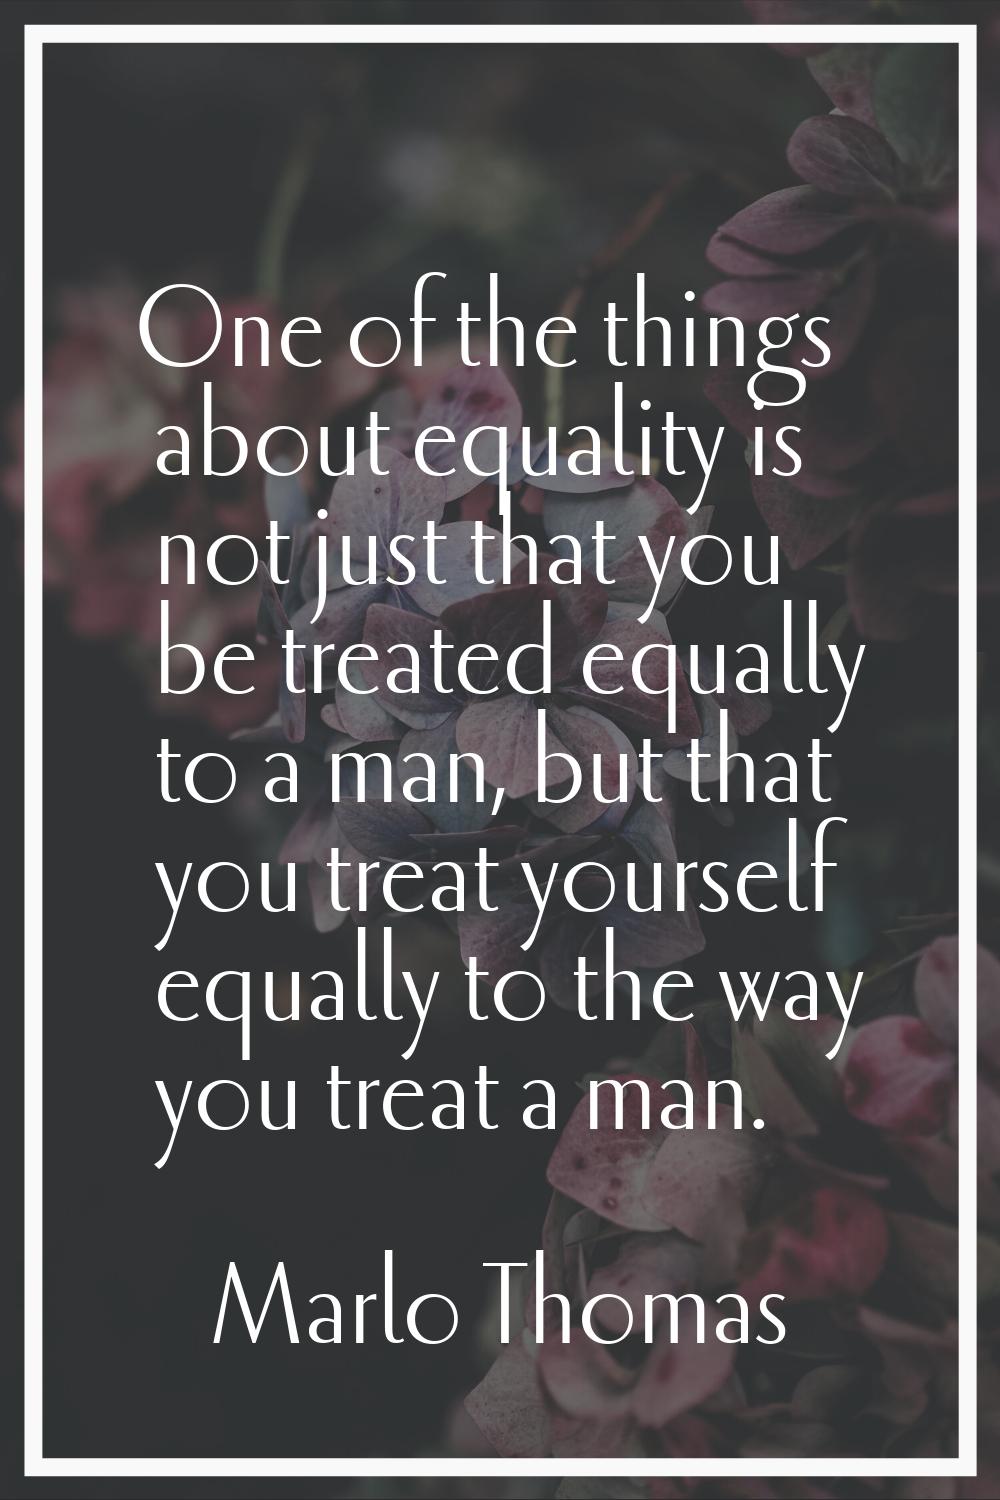 One of the things about equality is not just that you be treated equally to a man, but that you tre